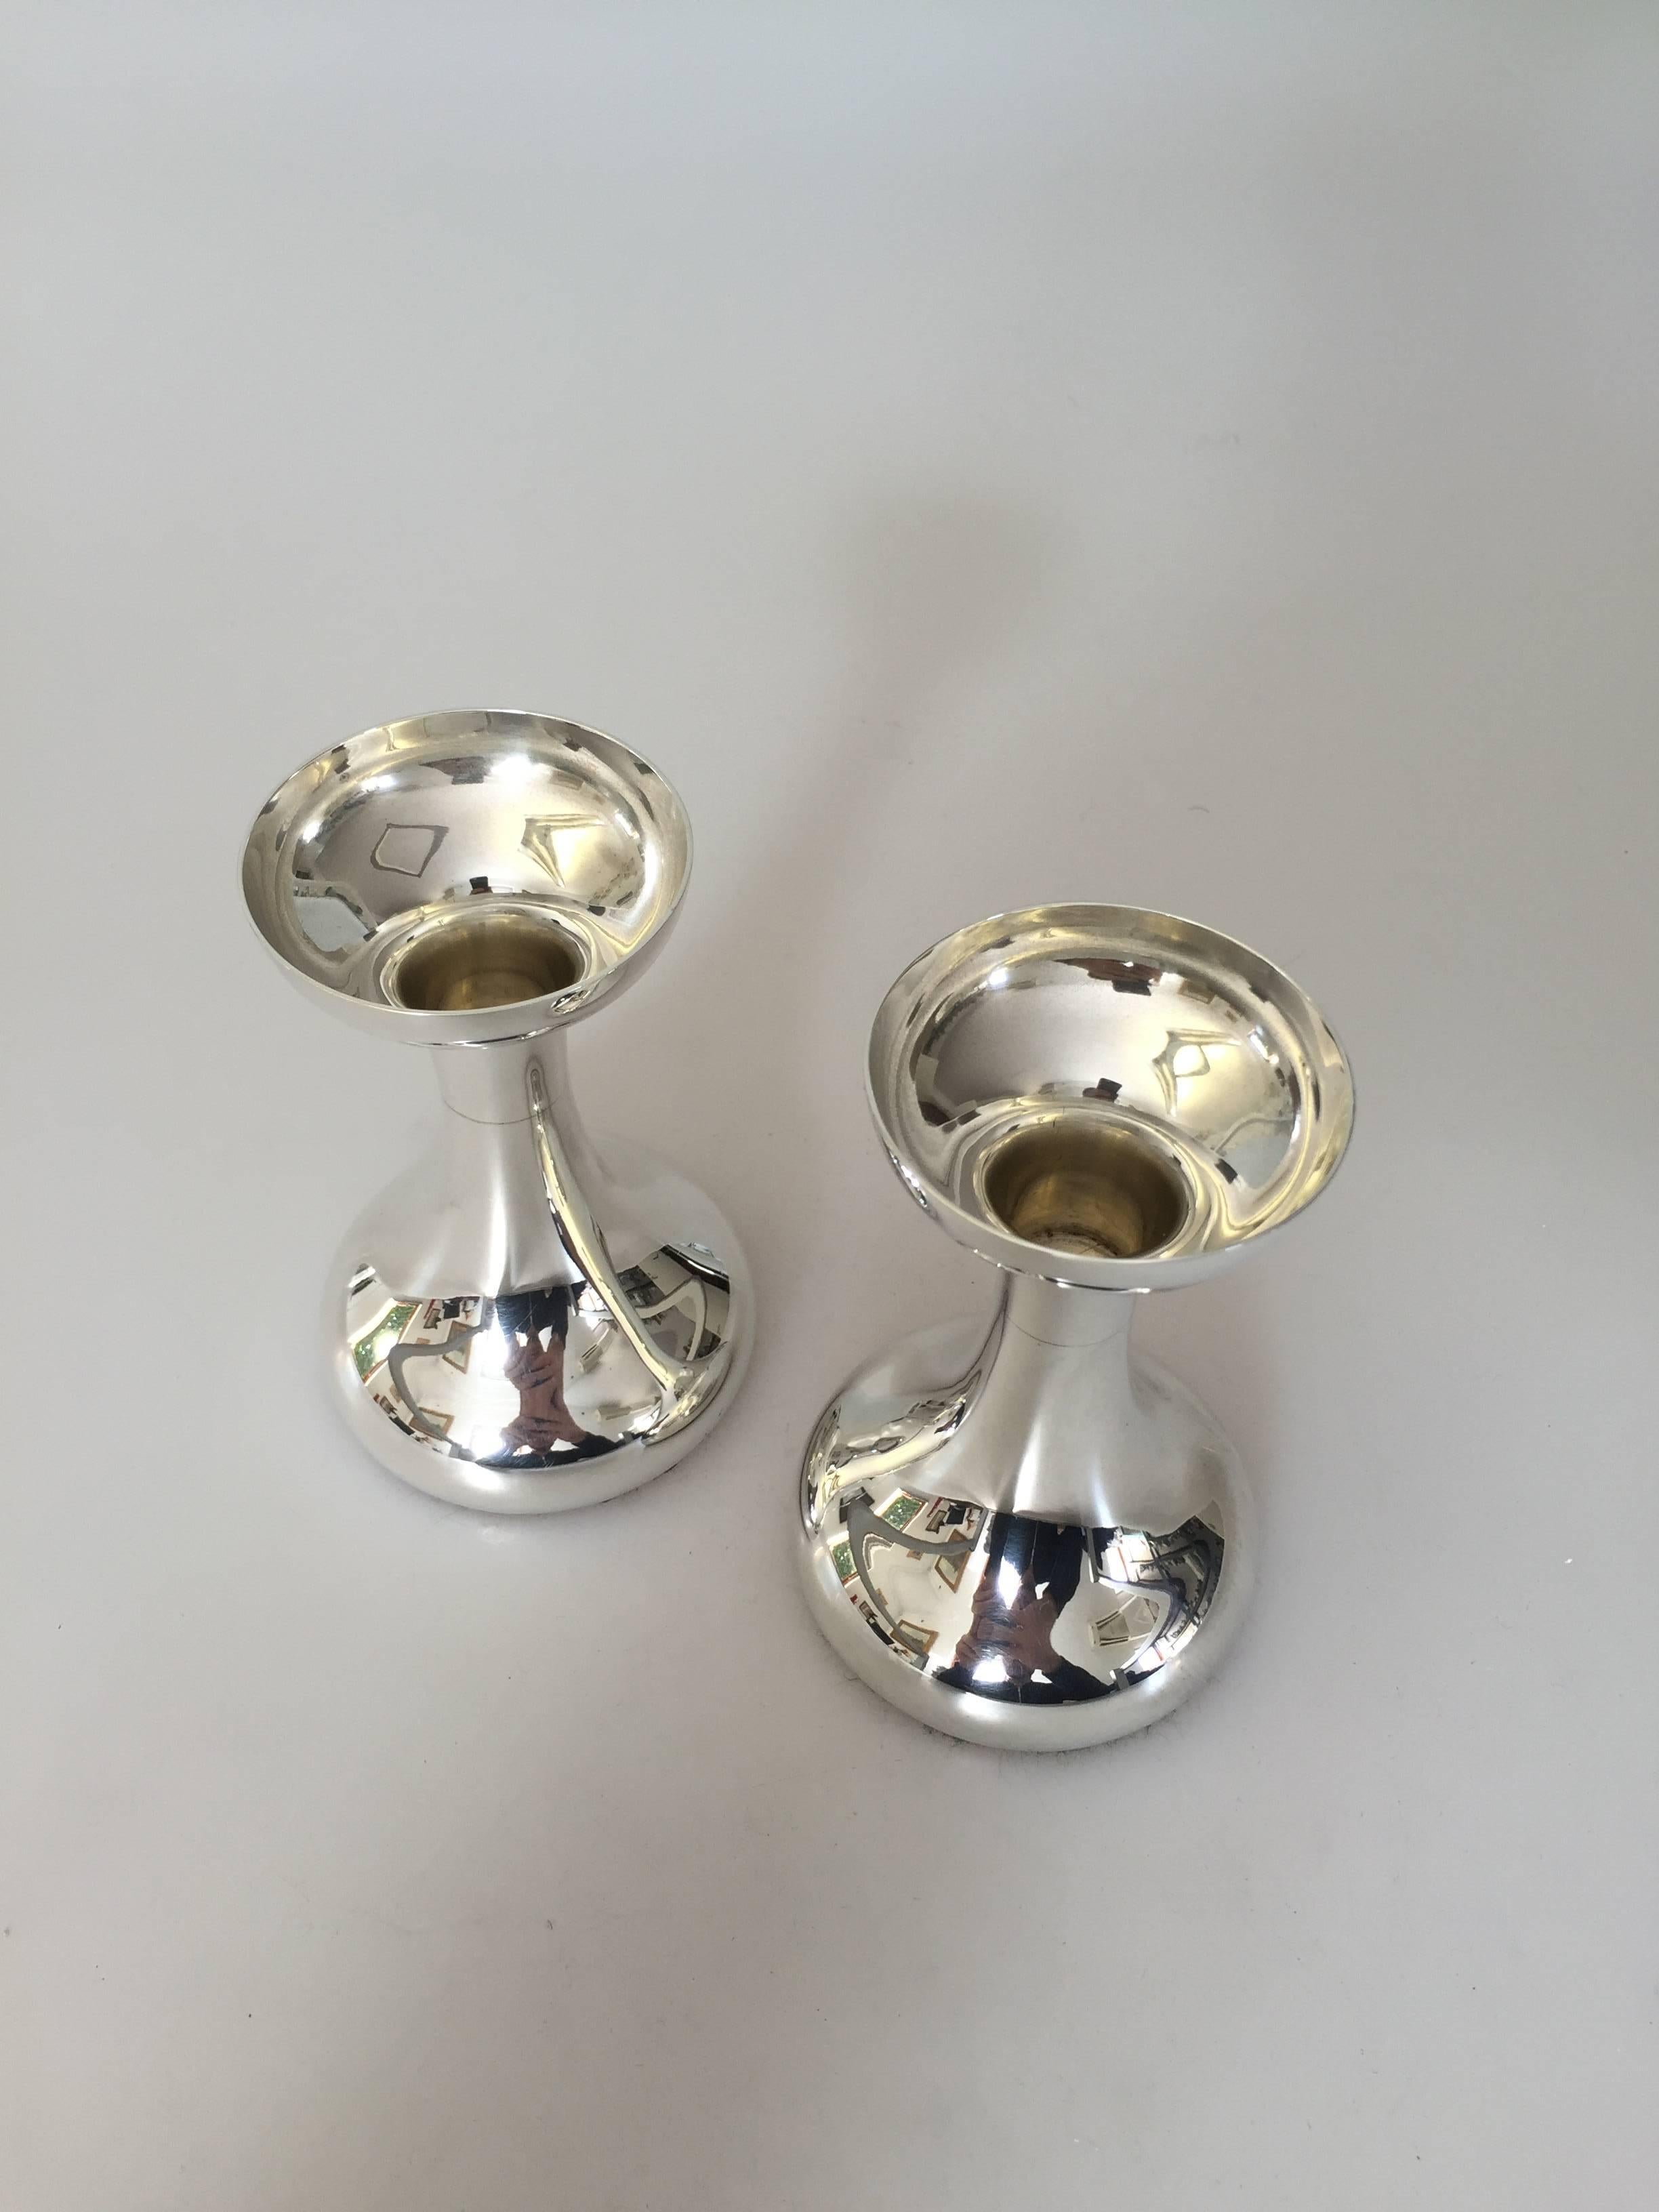 F. Hingelberg sterling silver Svend Weihrauch pair of candlesticks. Measures 11 cm high and is in a good condition.

Silver from Hingelbergs silversmithy where Svend Weirauch was in charge as a silversmithy and designer from 1928, was early on